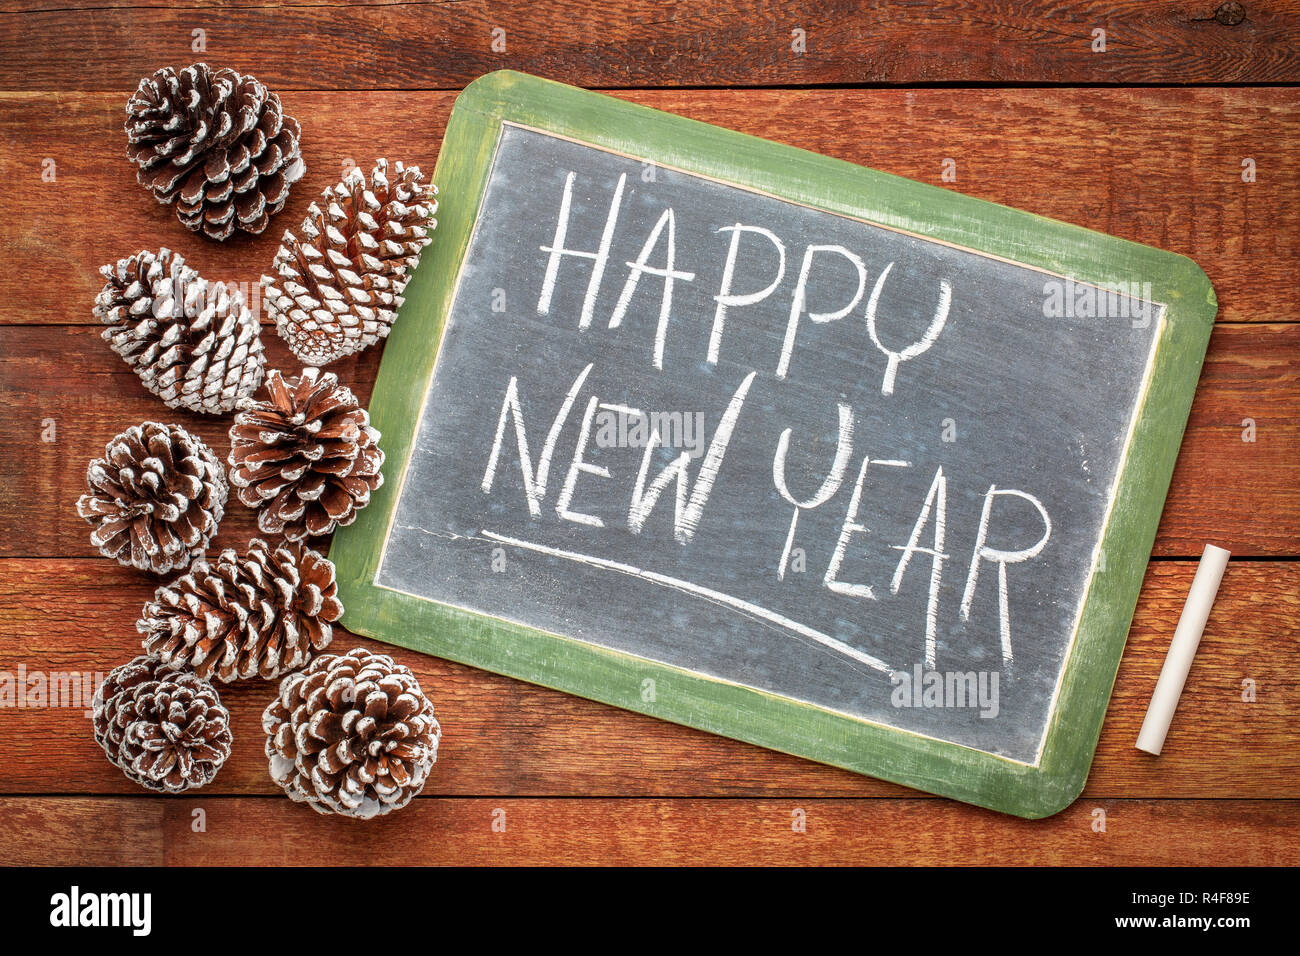 happy new year - white chalk handwriting on a slate blackboard with frosty pine cones against rustic barn wood Stock Photo